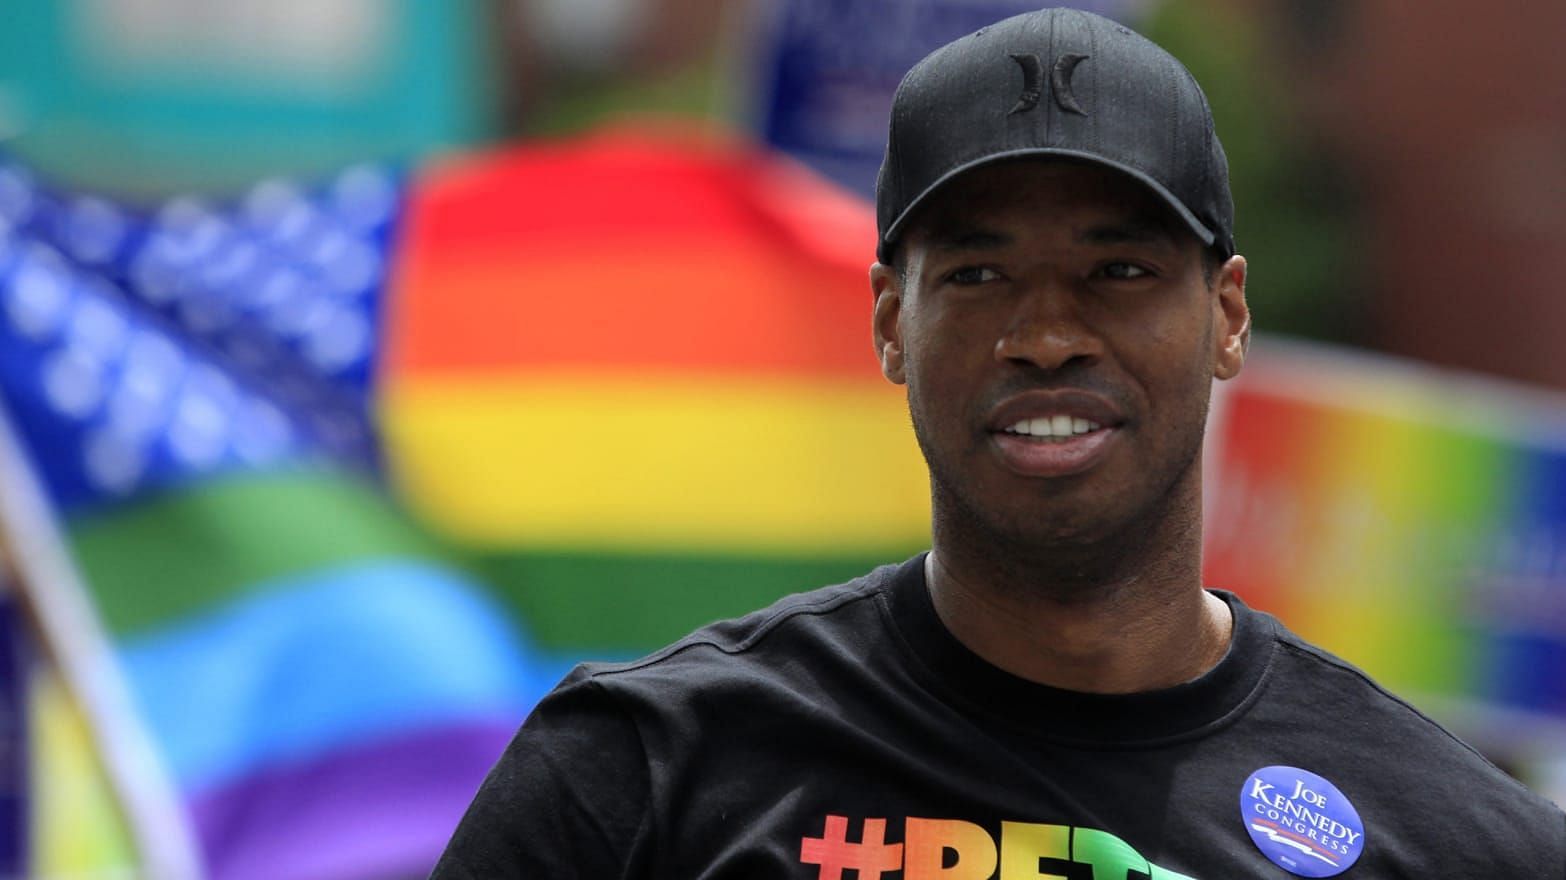 The NBA proudly supports the LGBTQ community. [photo: NBA.com]